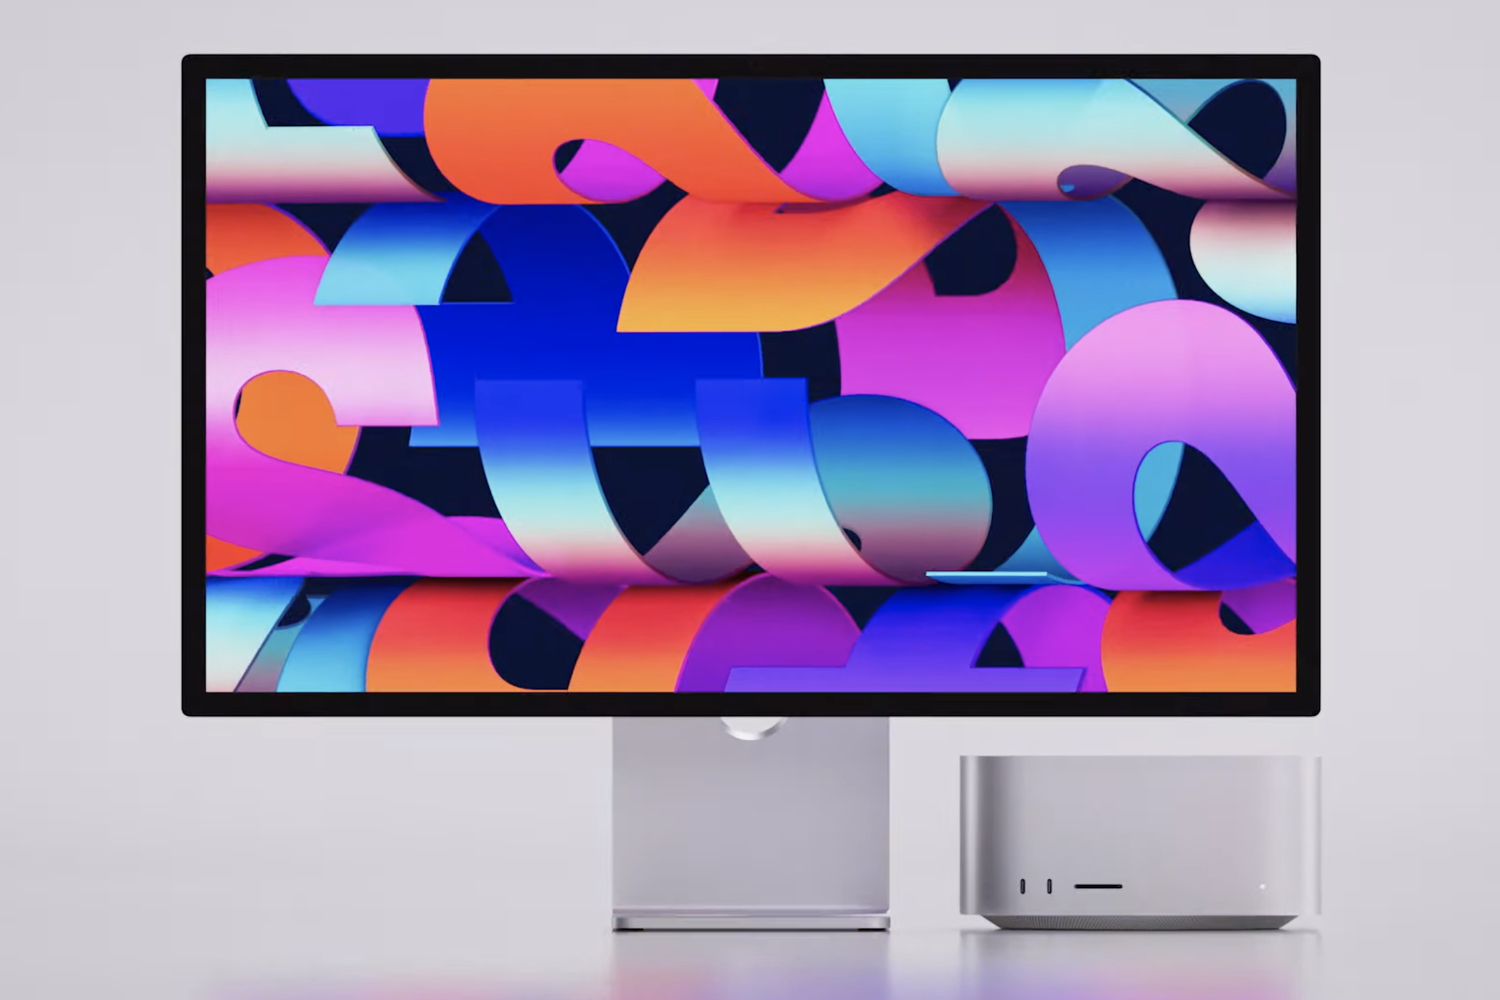 Mac Studio unveiled: The Most Powerful Apple PC Ever